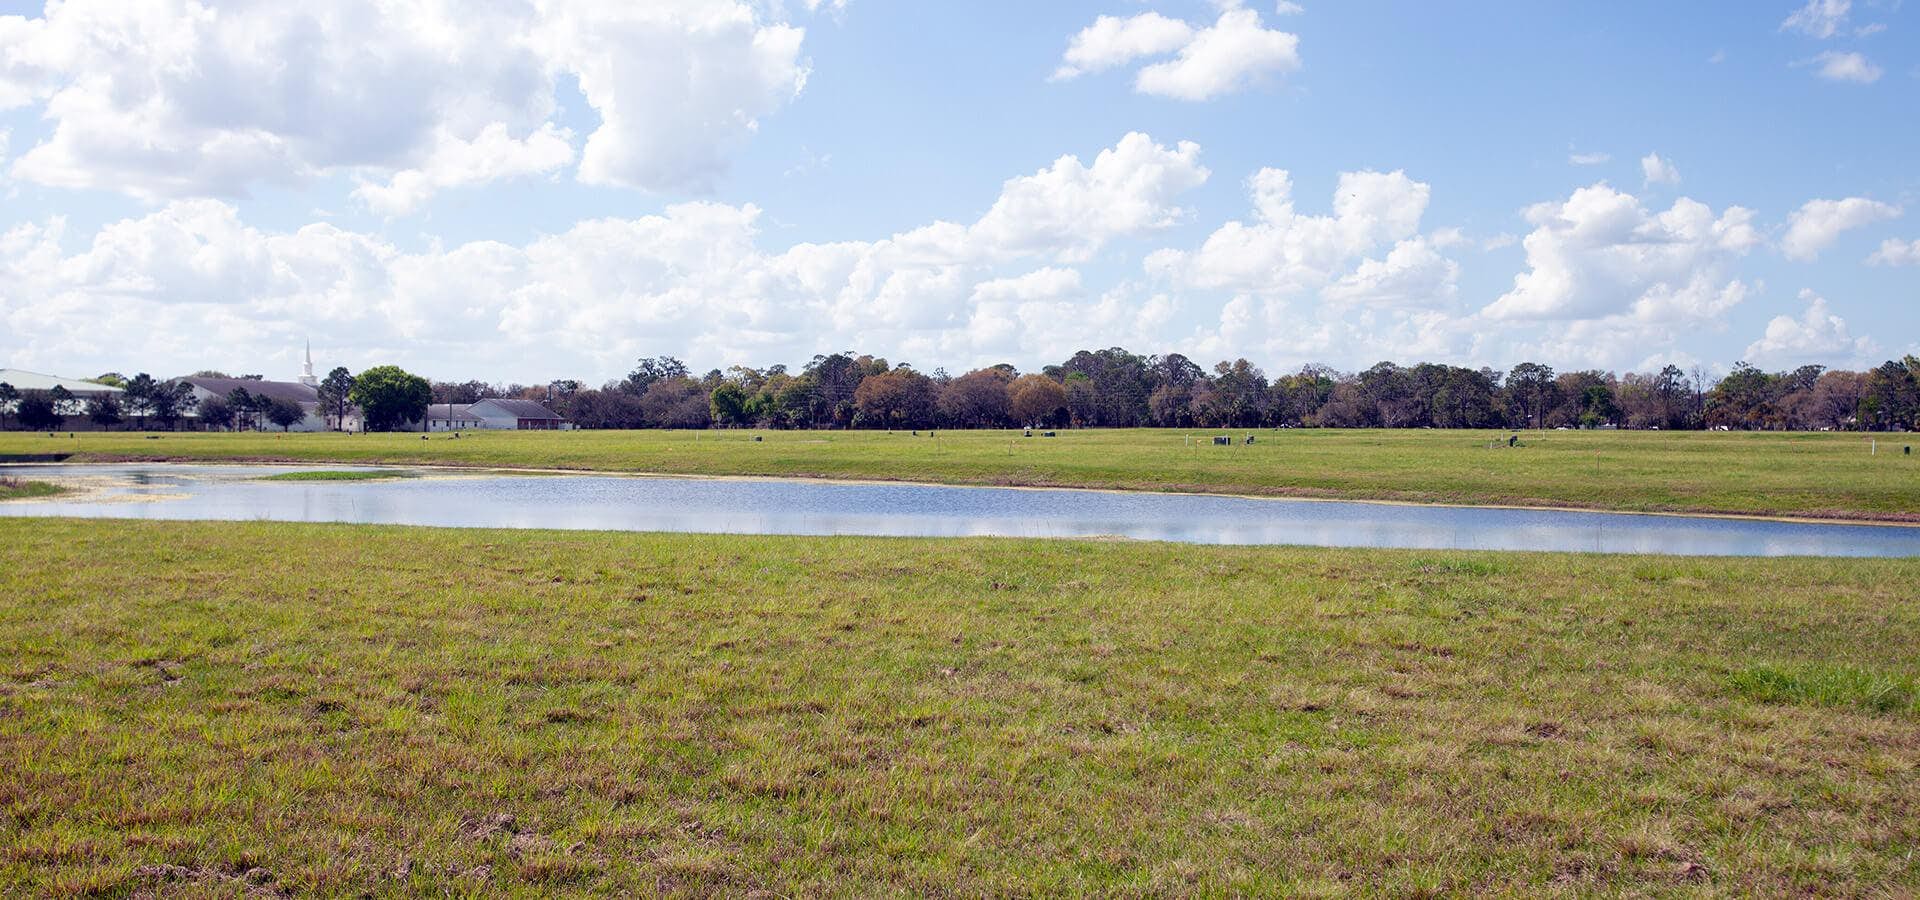 Outdoor amenities and pond at Lakeside Preserve